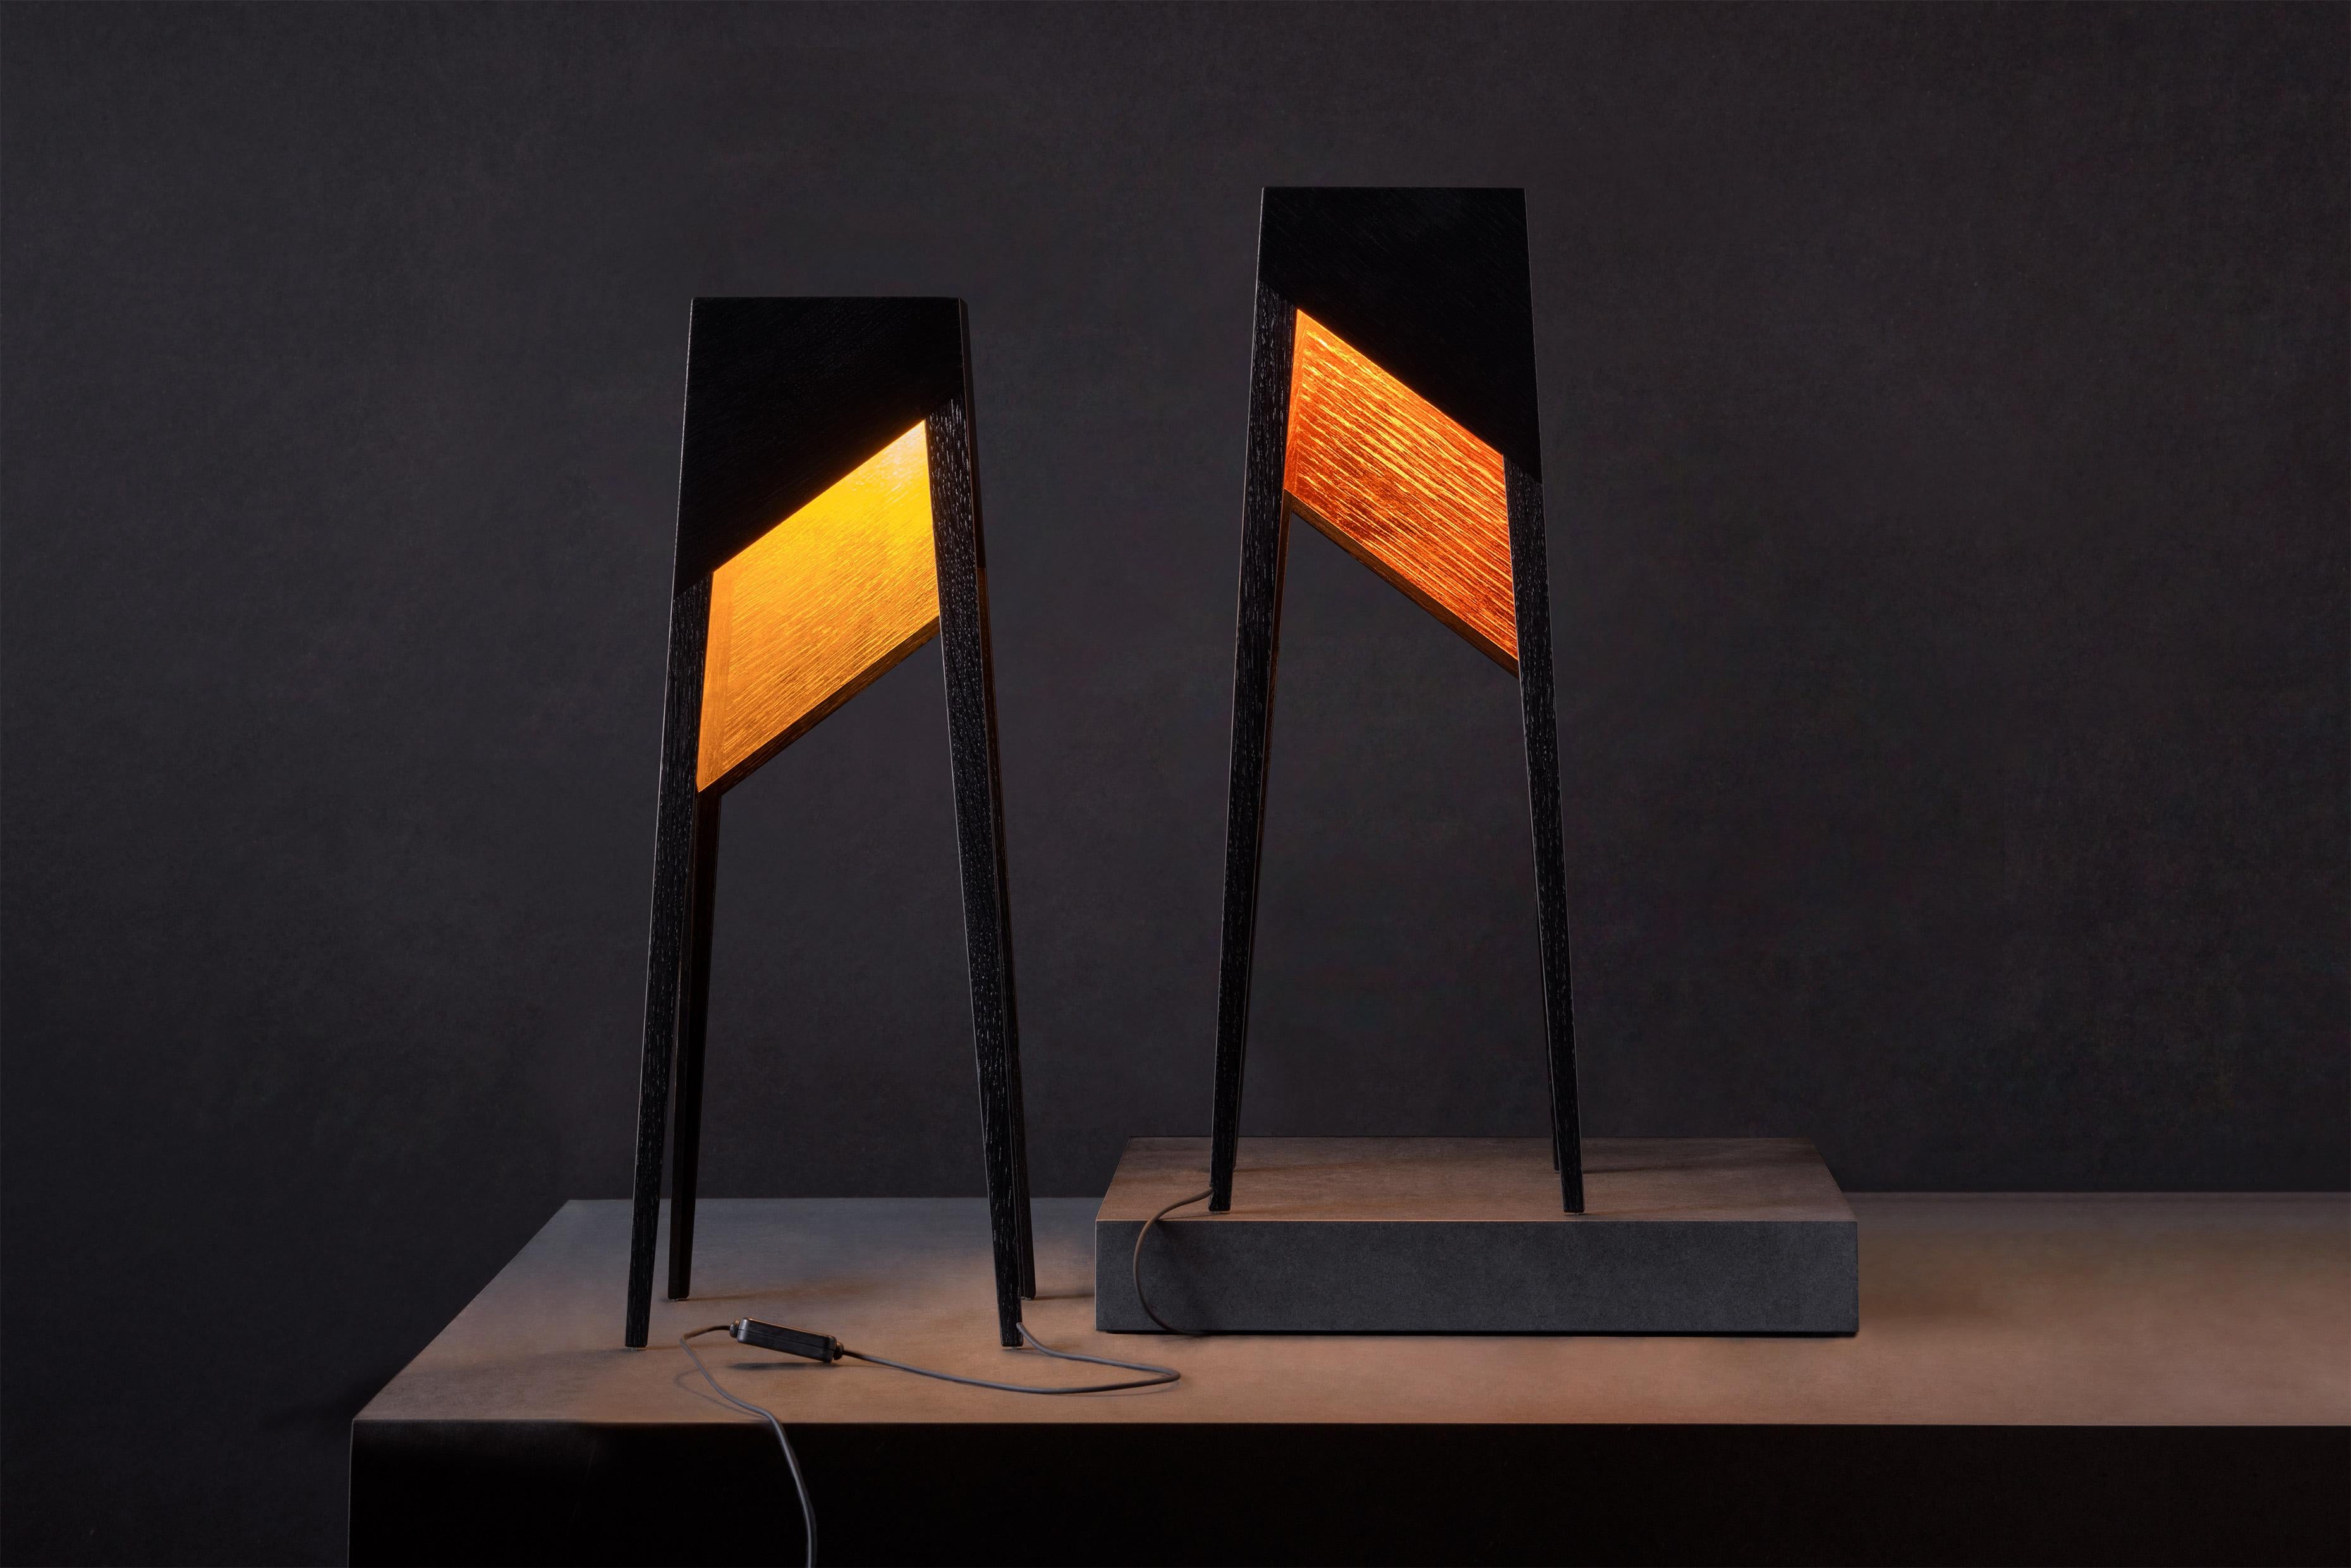 Set of 2 Luise LTD Baby floor lamp by Matthias Scherzinger
Limited Edition of 2 
Dimensions: H 46.5 x 18 cm
Materials: solid wood - oak black stained hard wax
 Inside surface: copper leaf, Gold leaf

All our lamps can be wired according to